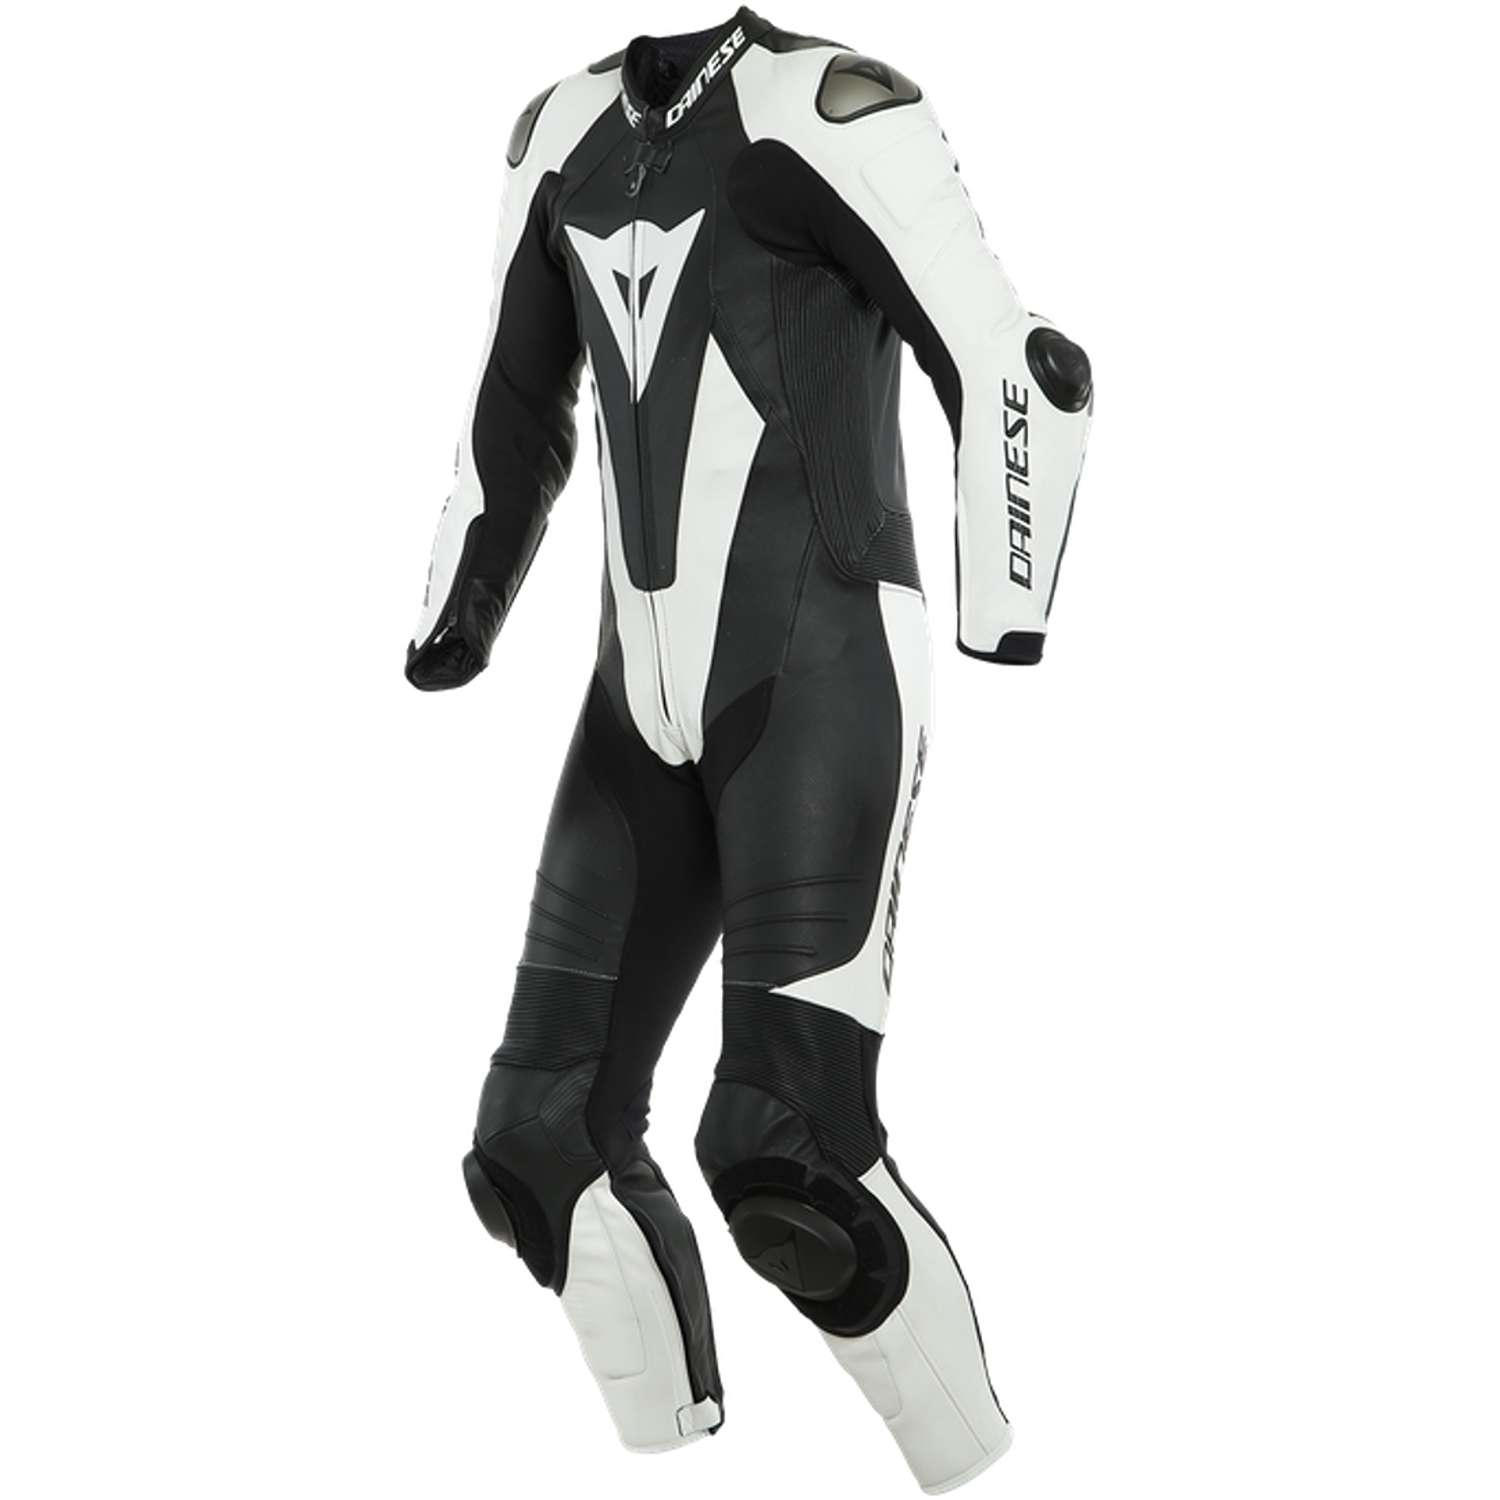 Image of Dainese Laguna Seca 5 1Pc Leather Suit Perf S/T Black White Größe 128